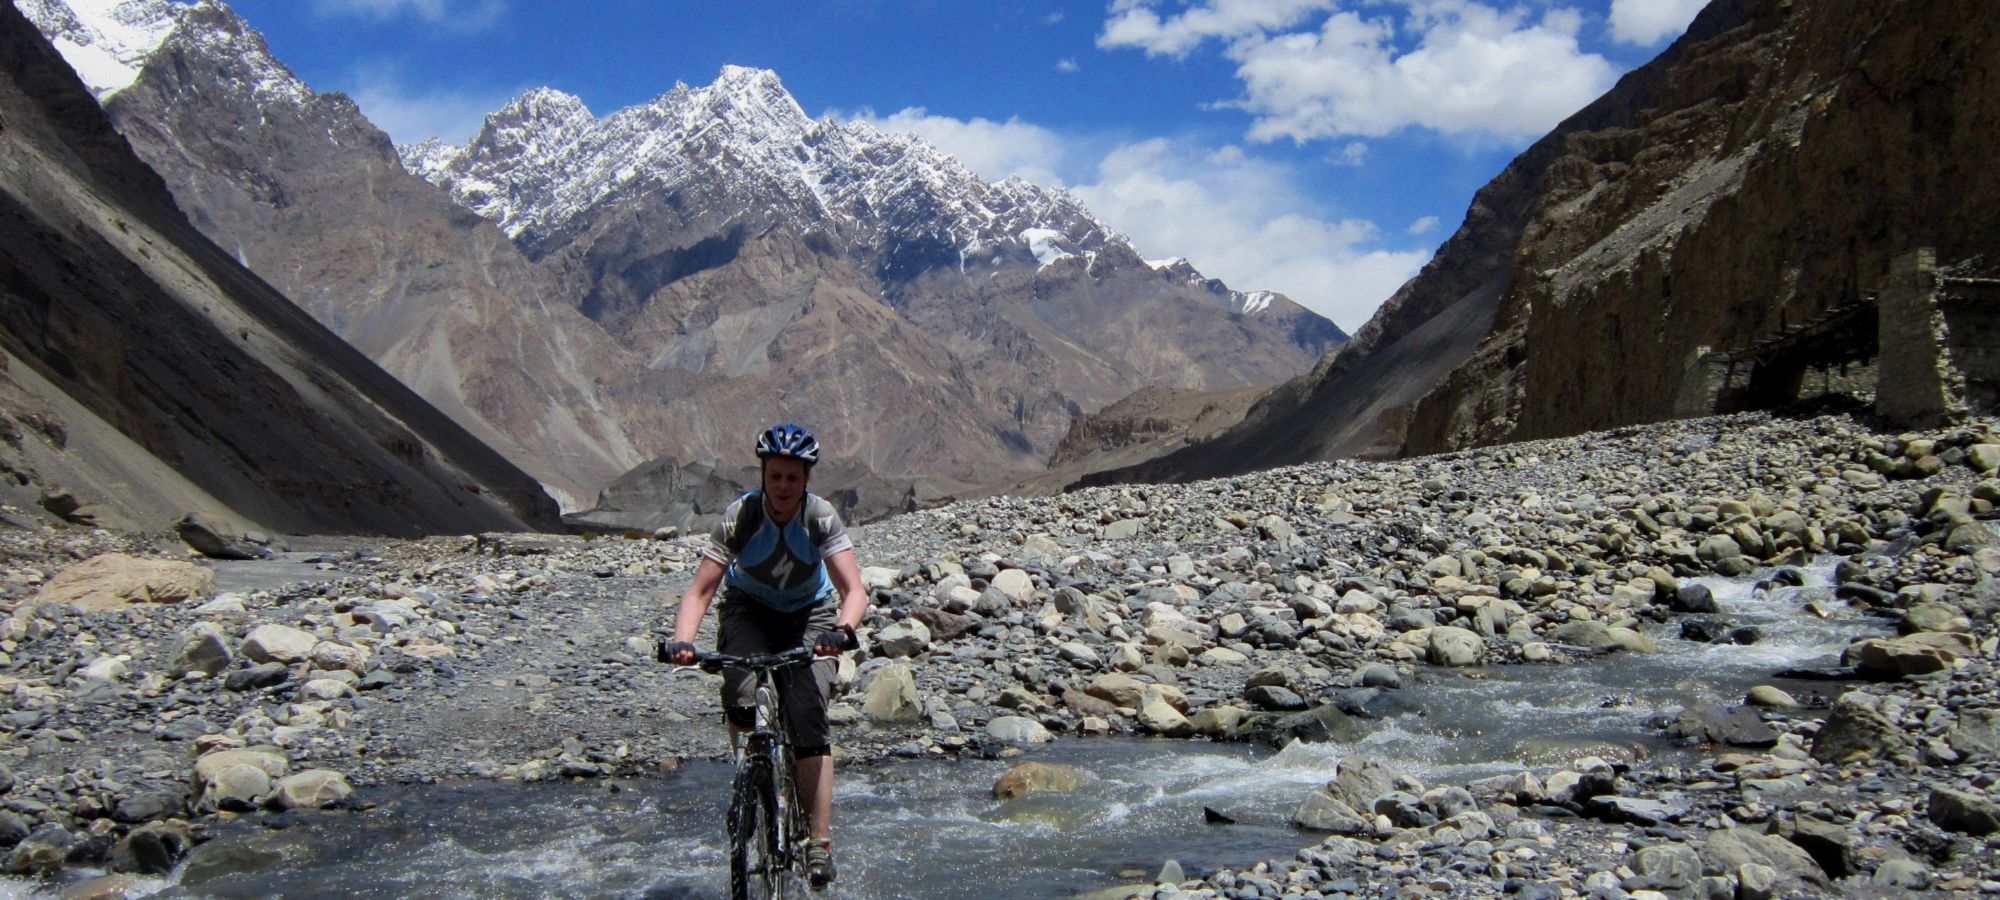 Photos from our Pakistan - The Old Silk Route Cycling Holiday